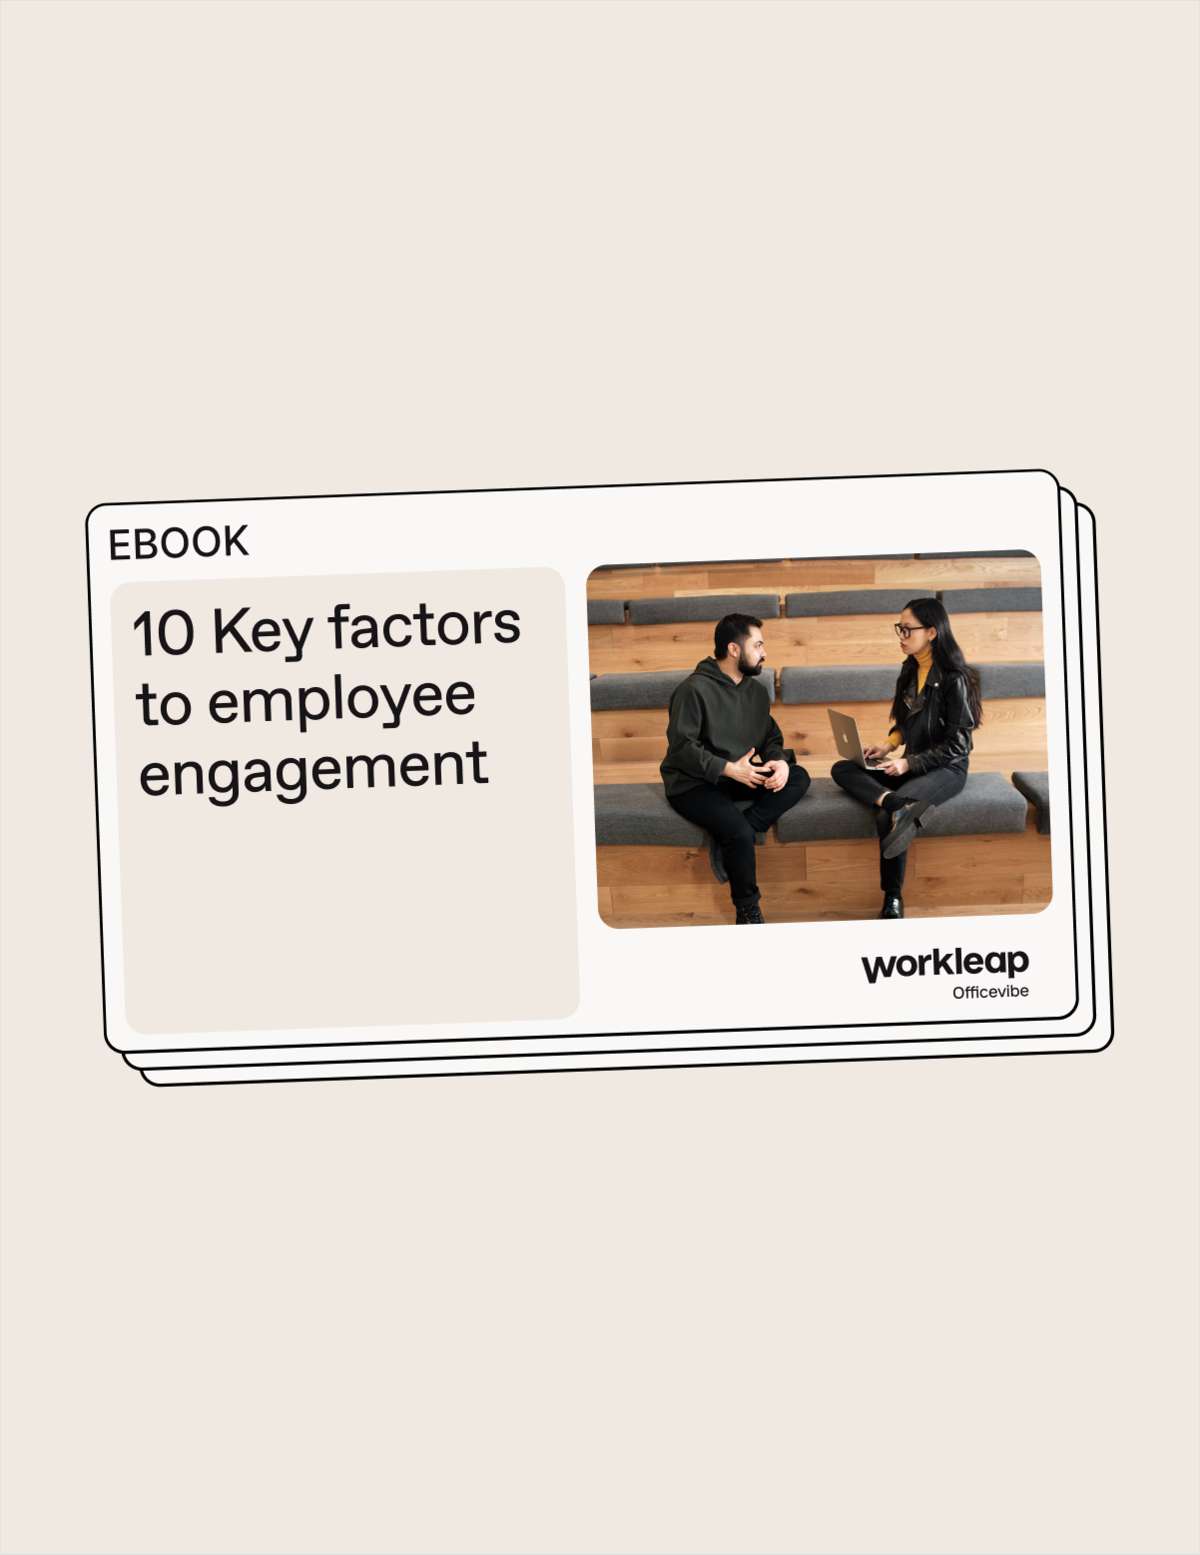 10 key factors to employee engagement